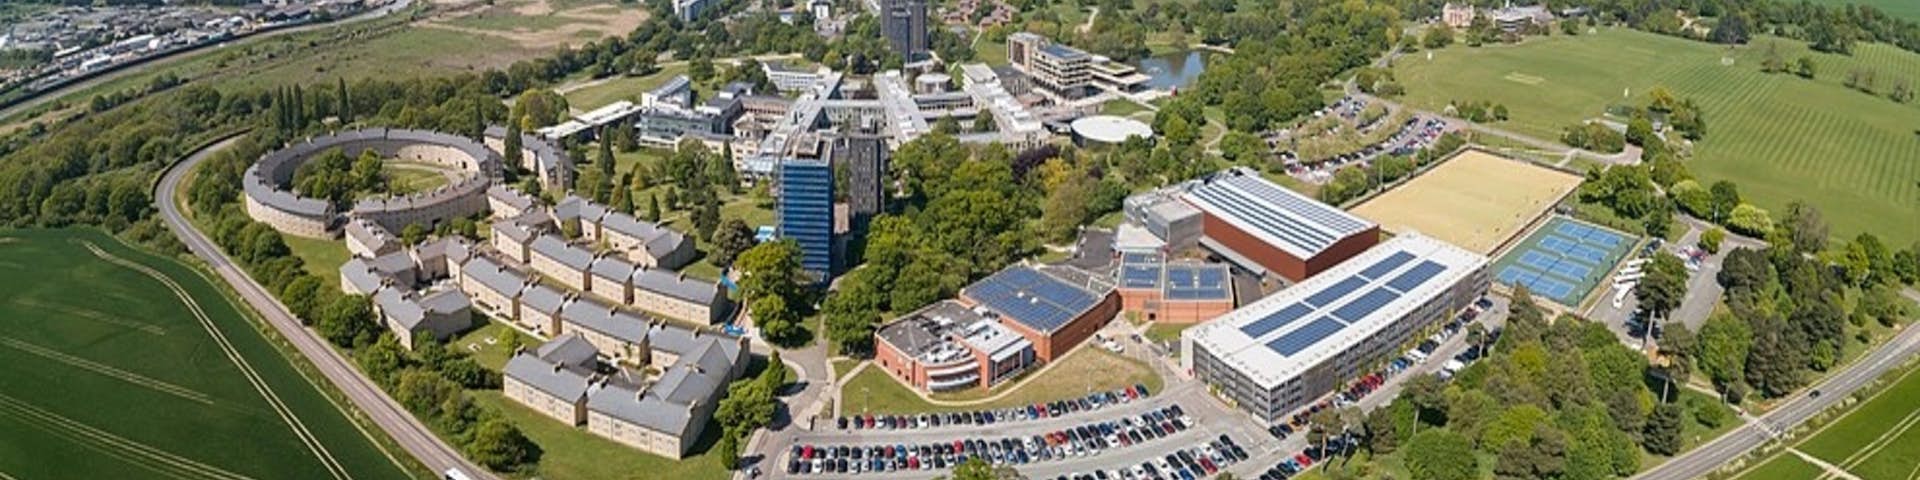 Accounting and Finance at University of Essex 